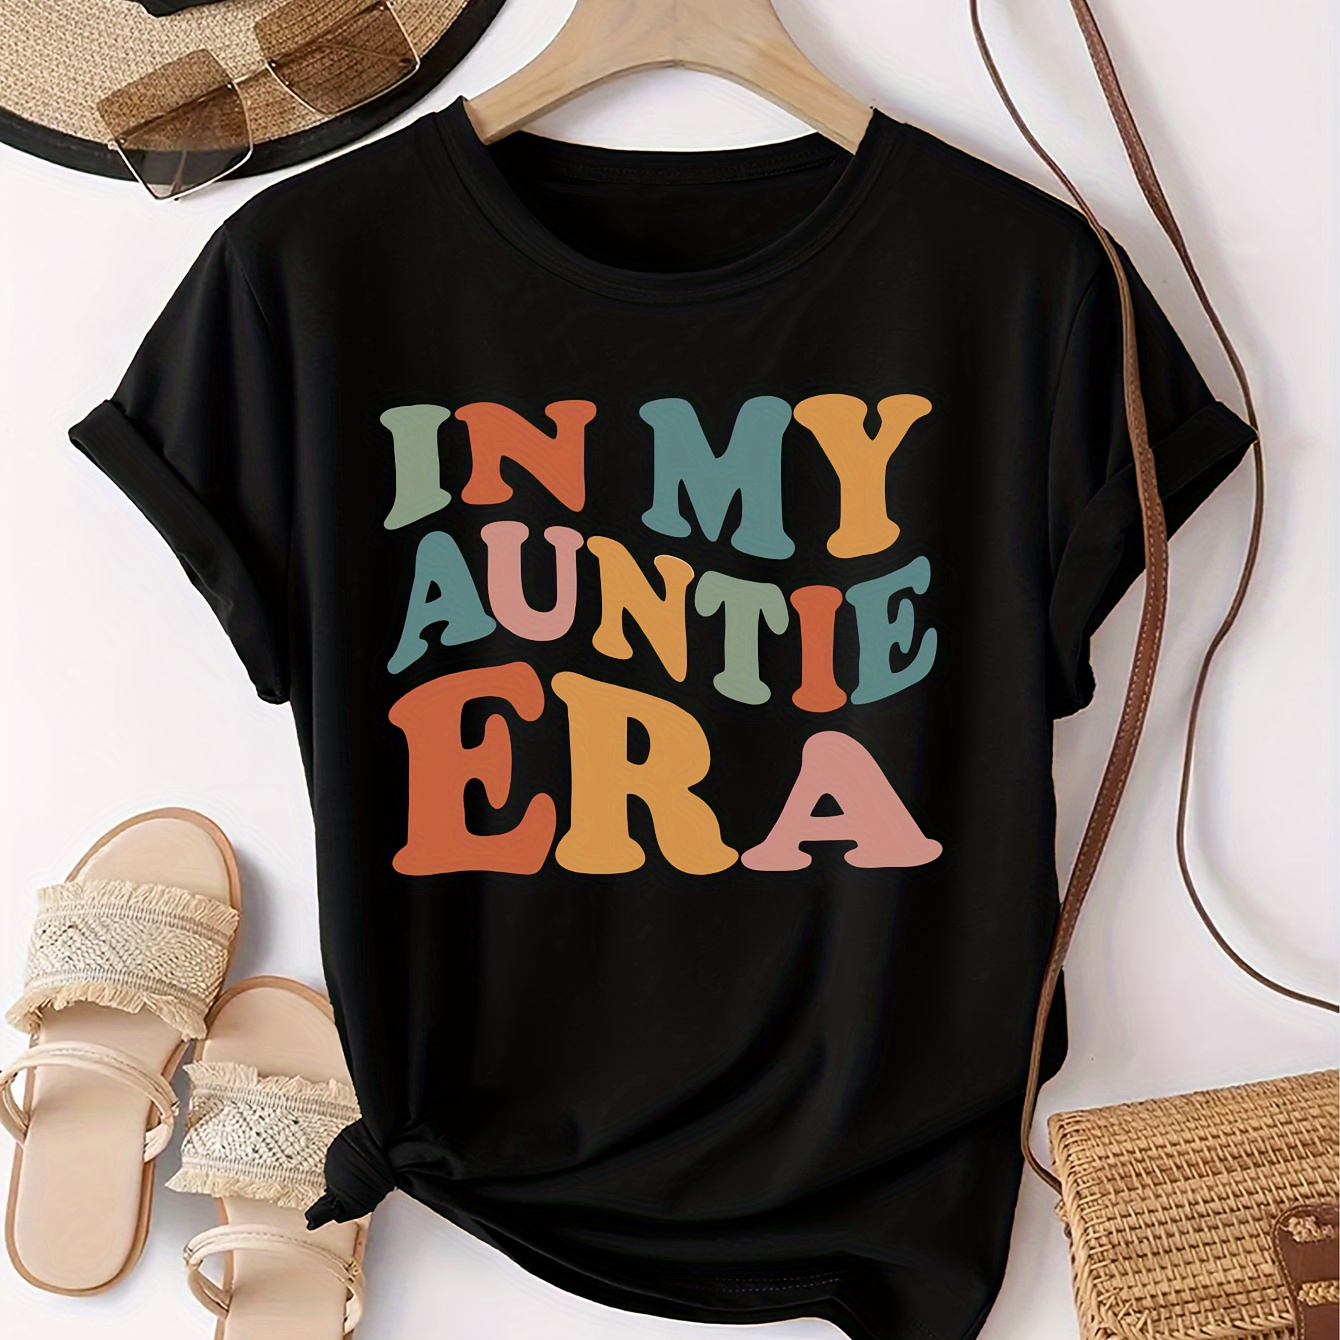 

In My Auntie Era Print T-shirt, Short Sleeve Crew Neck Casual Top For Summer & Spring, Women's Clothing